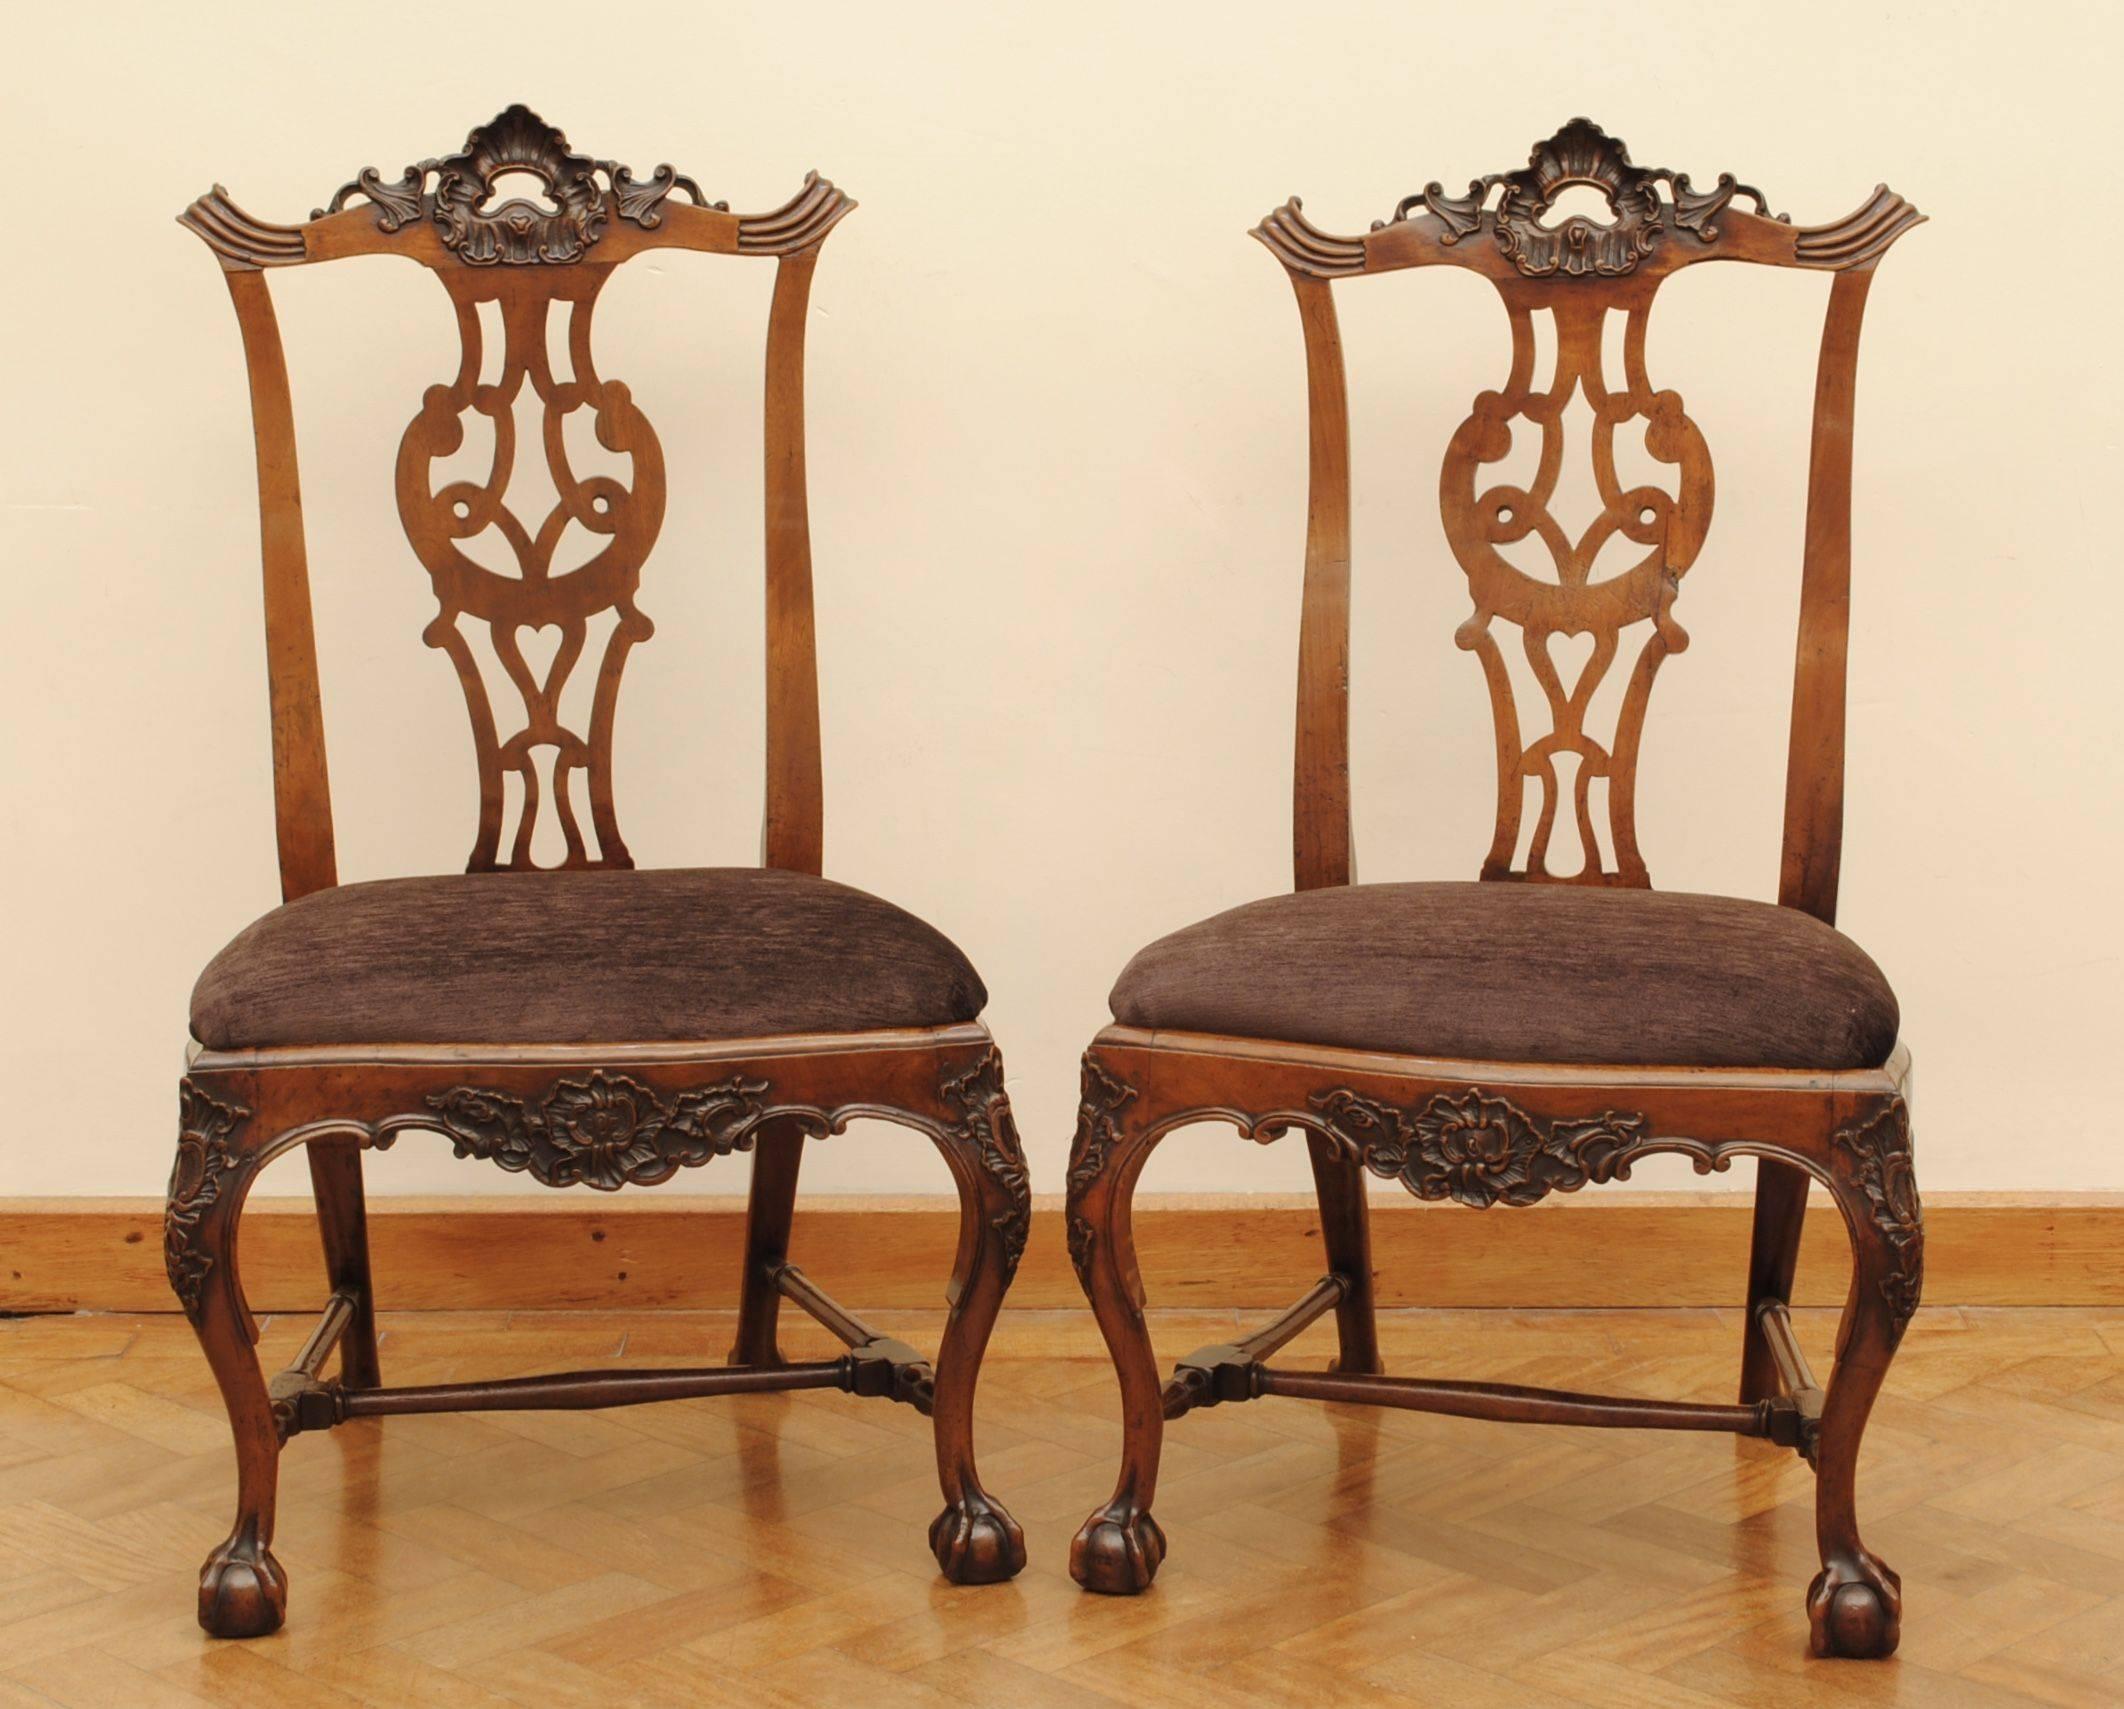 A set of eight carved walnut cabriole leg chairs with ball and claw feet and carved top rail. The style of these chairs show the influence of the Chippendale design book that made its way with the English merchants to Lisbon and was then used